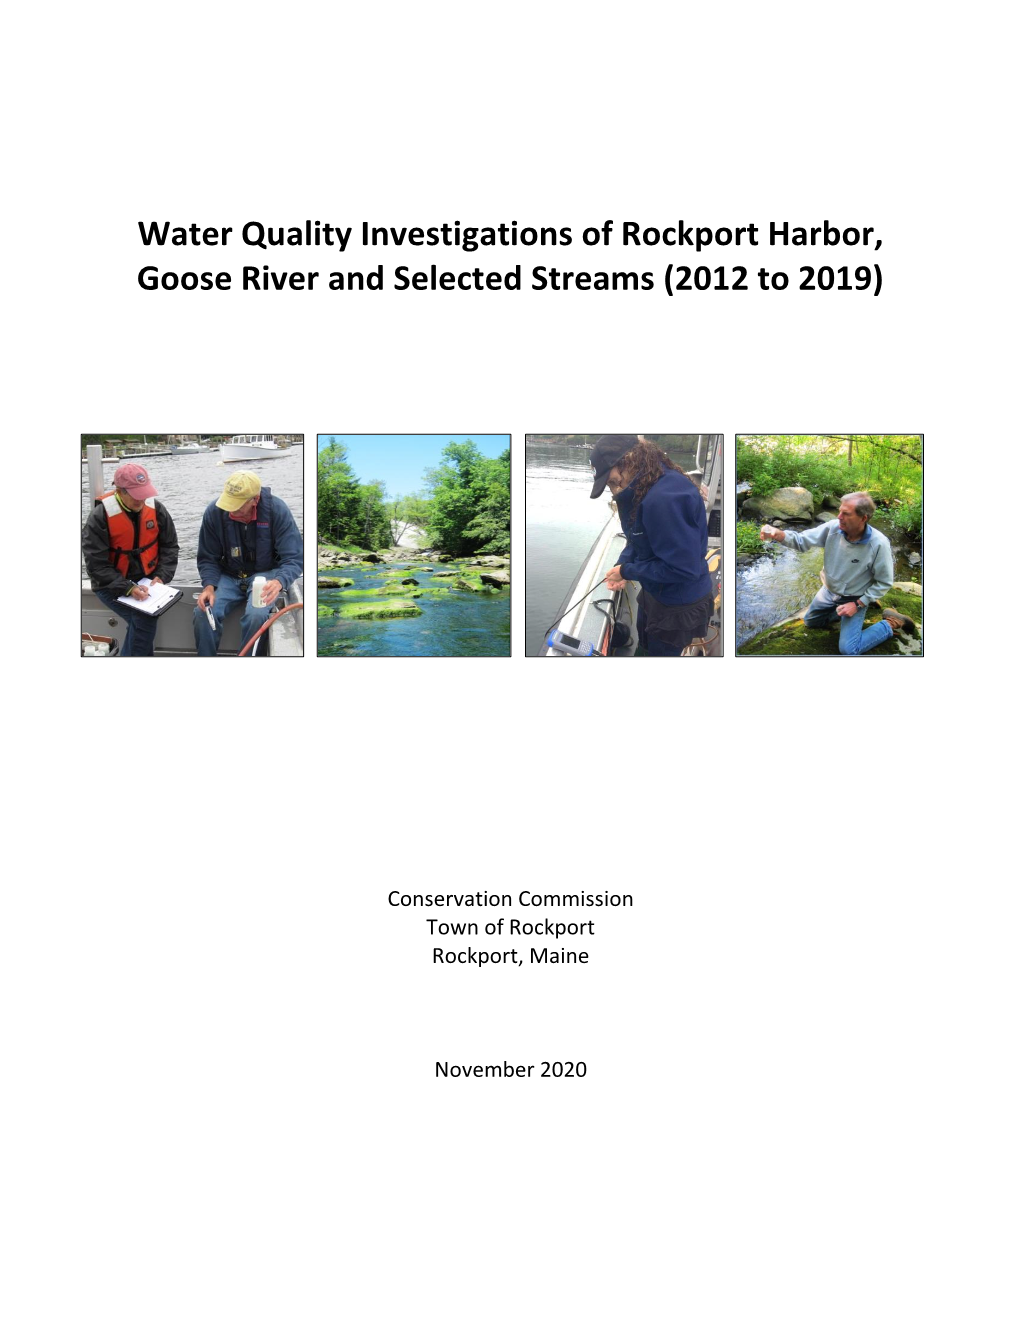 Water Quality Investigations of Rockport Harbor, Goose River and Selected Streams (2012 to 2019)